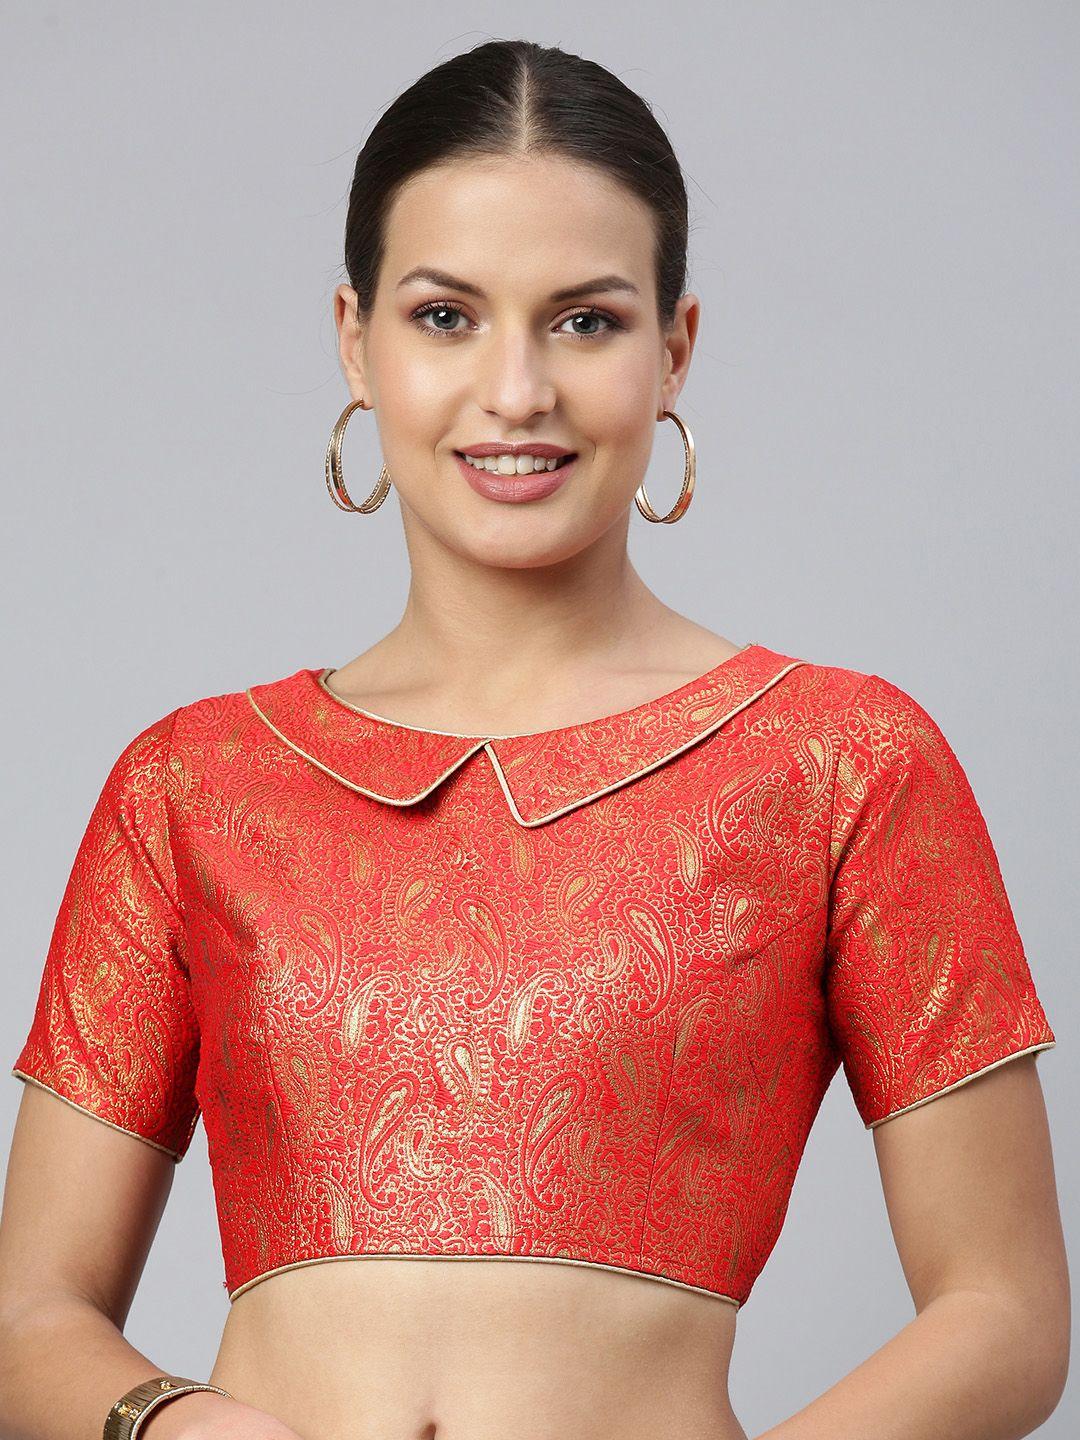 flaher women red & gold ethnic motifs jacquard woven design saree blouse with cut-out